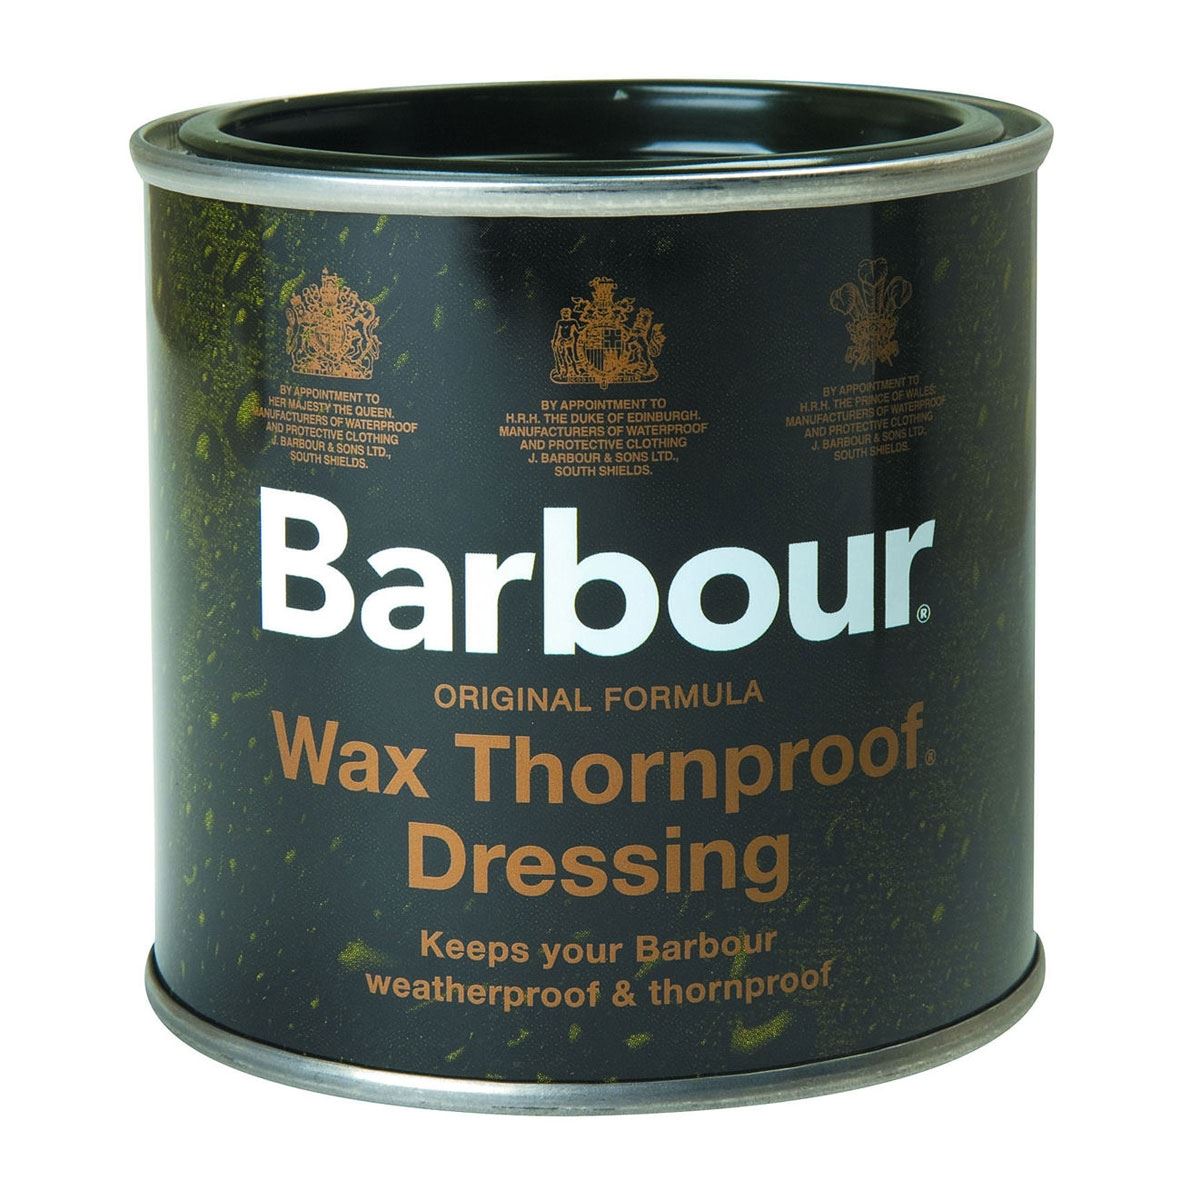 Where can I find your stores that sell Barbour Wax Thornproof Dressing?